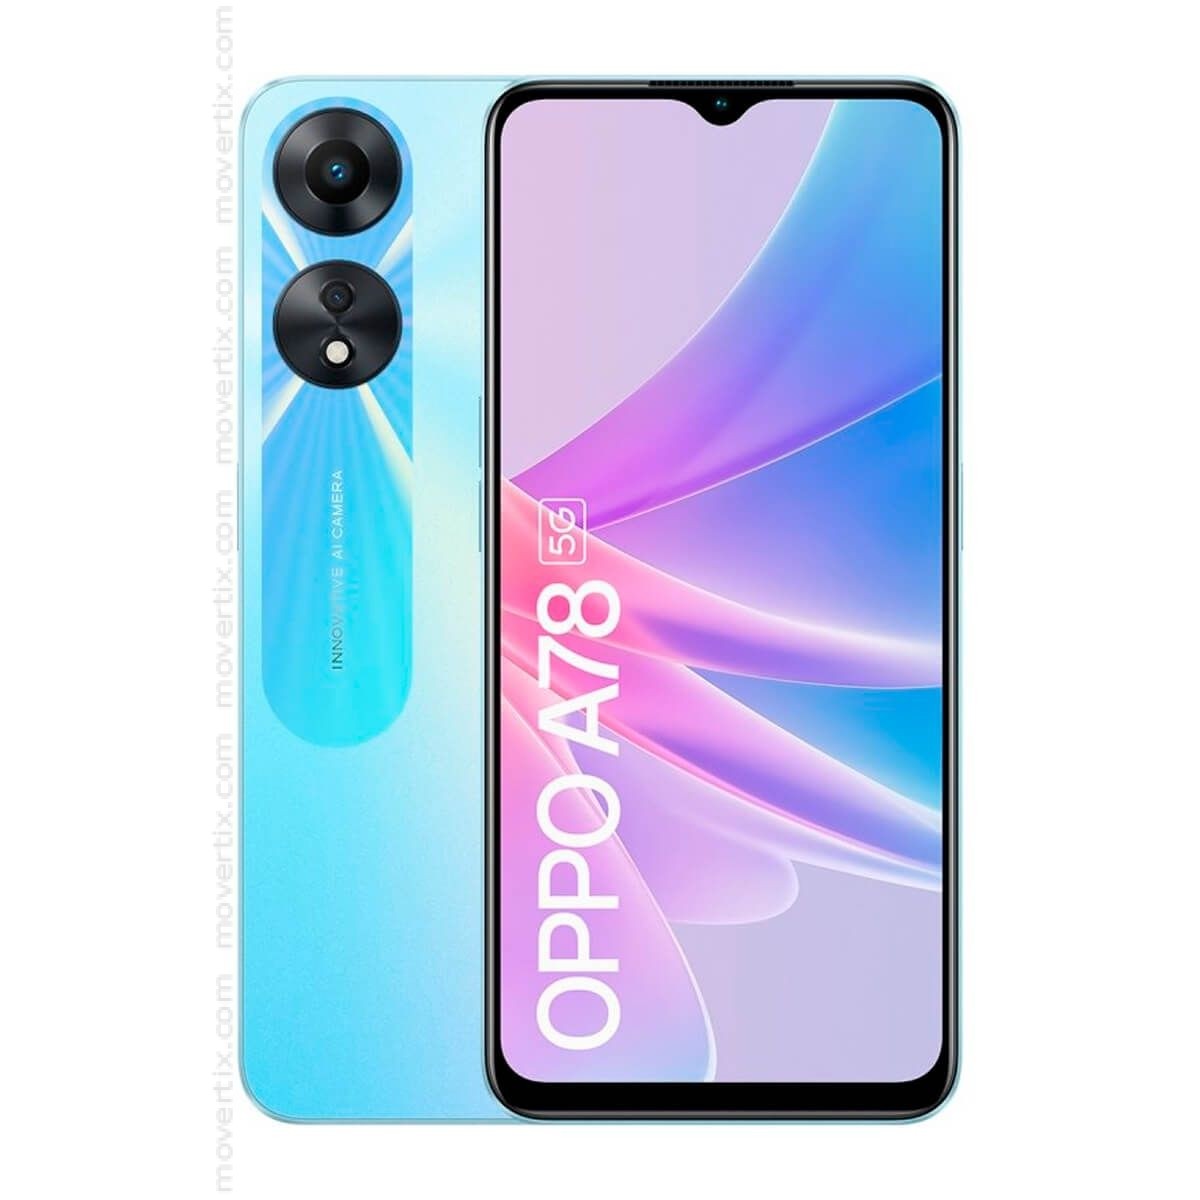 Smartphone - Oppo A78 5G, 8+128GB, 6,56, Glowing Blue